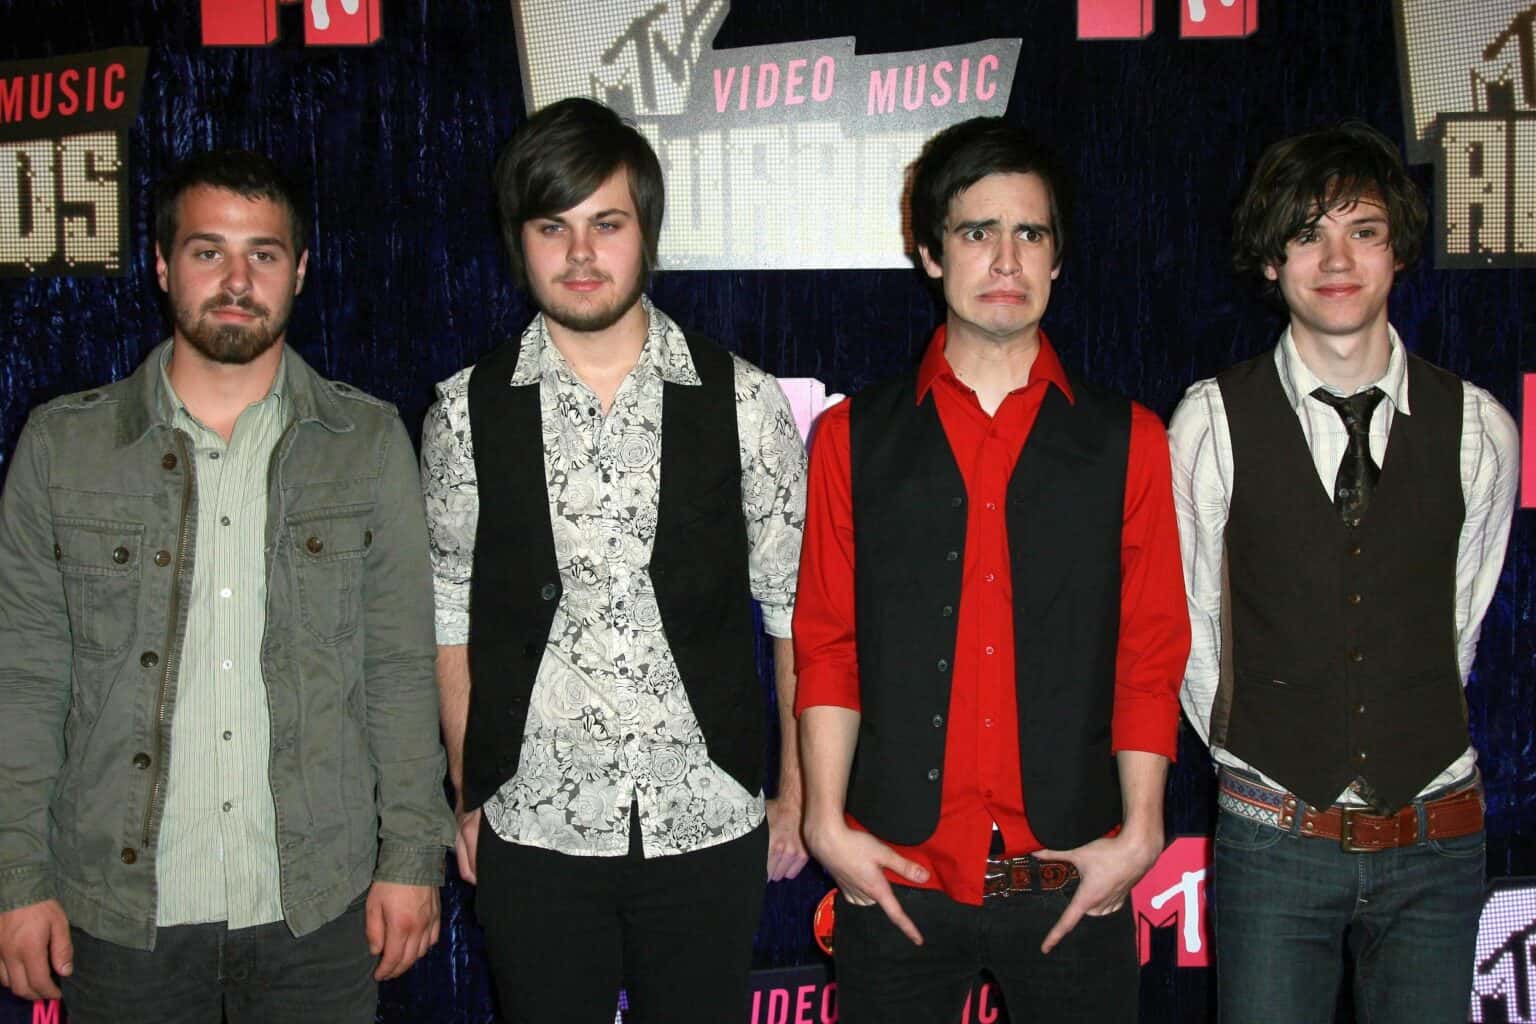 Why Did Panic! at the Disco Break Up?